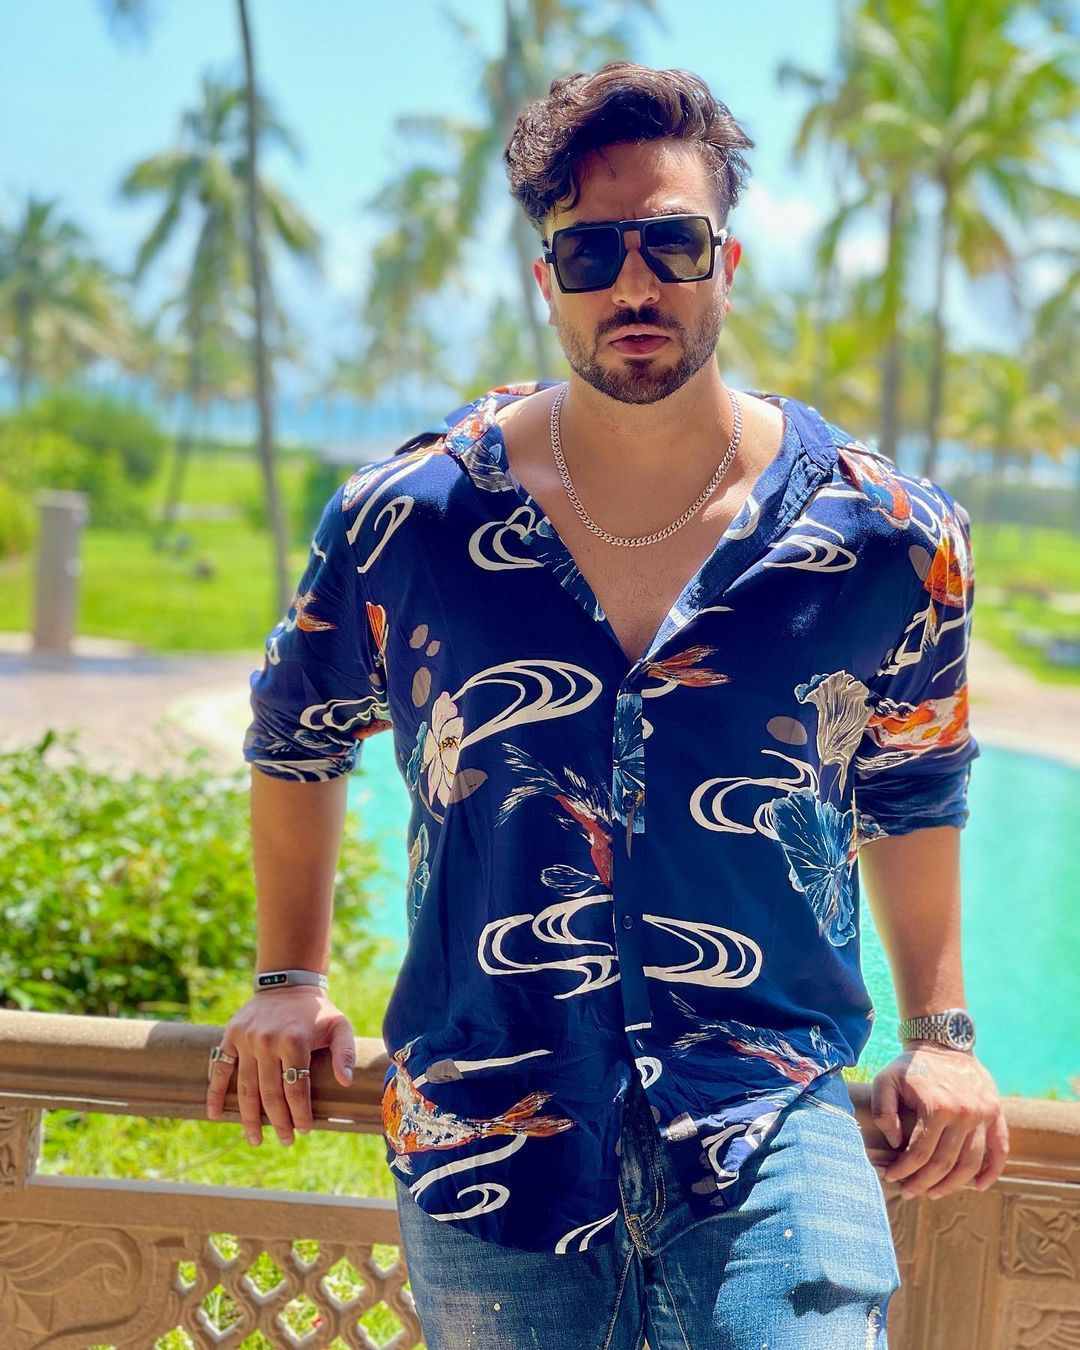 Bigg Boss 14’s Aly Goni reveals why he hasn’t resumed work despite getting many offers